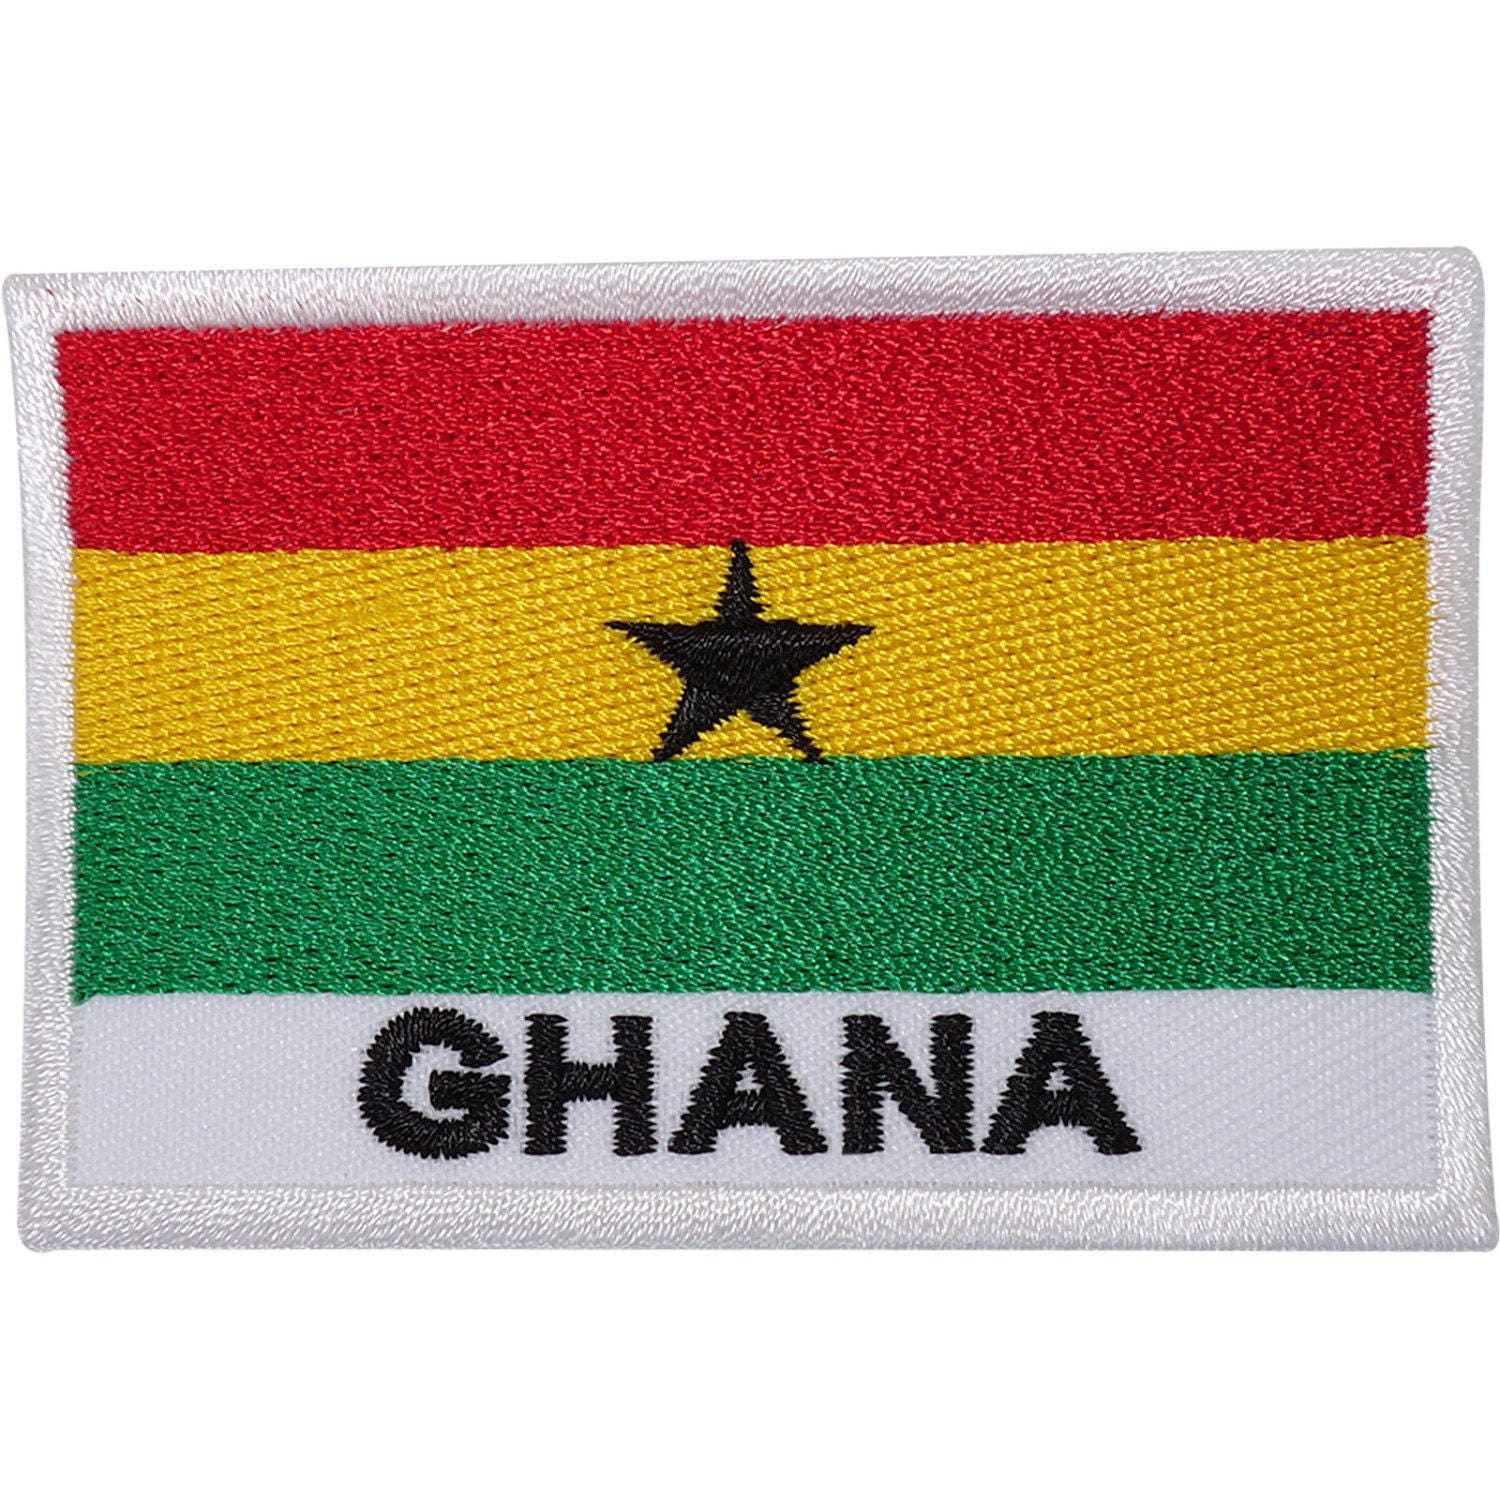 Exclusive Design From 1000 Flags Sew On Or Iron On Ghana Flag Embroidered Rectangular Patch Badge 